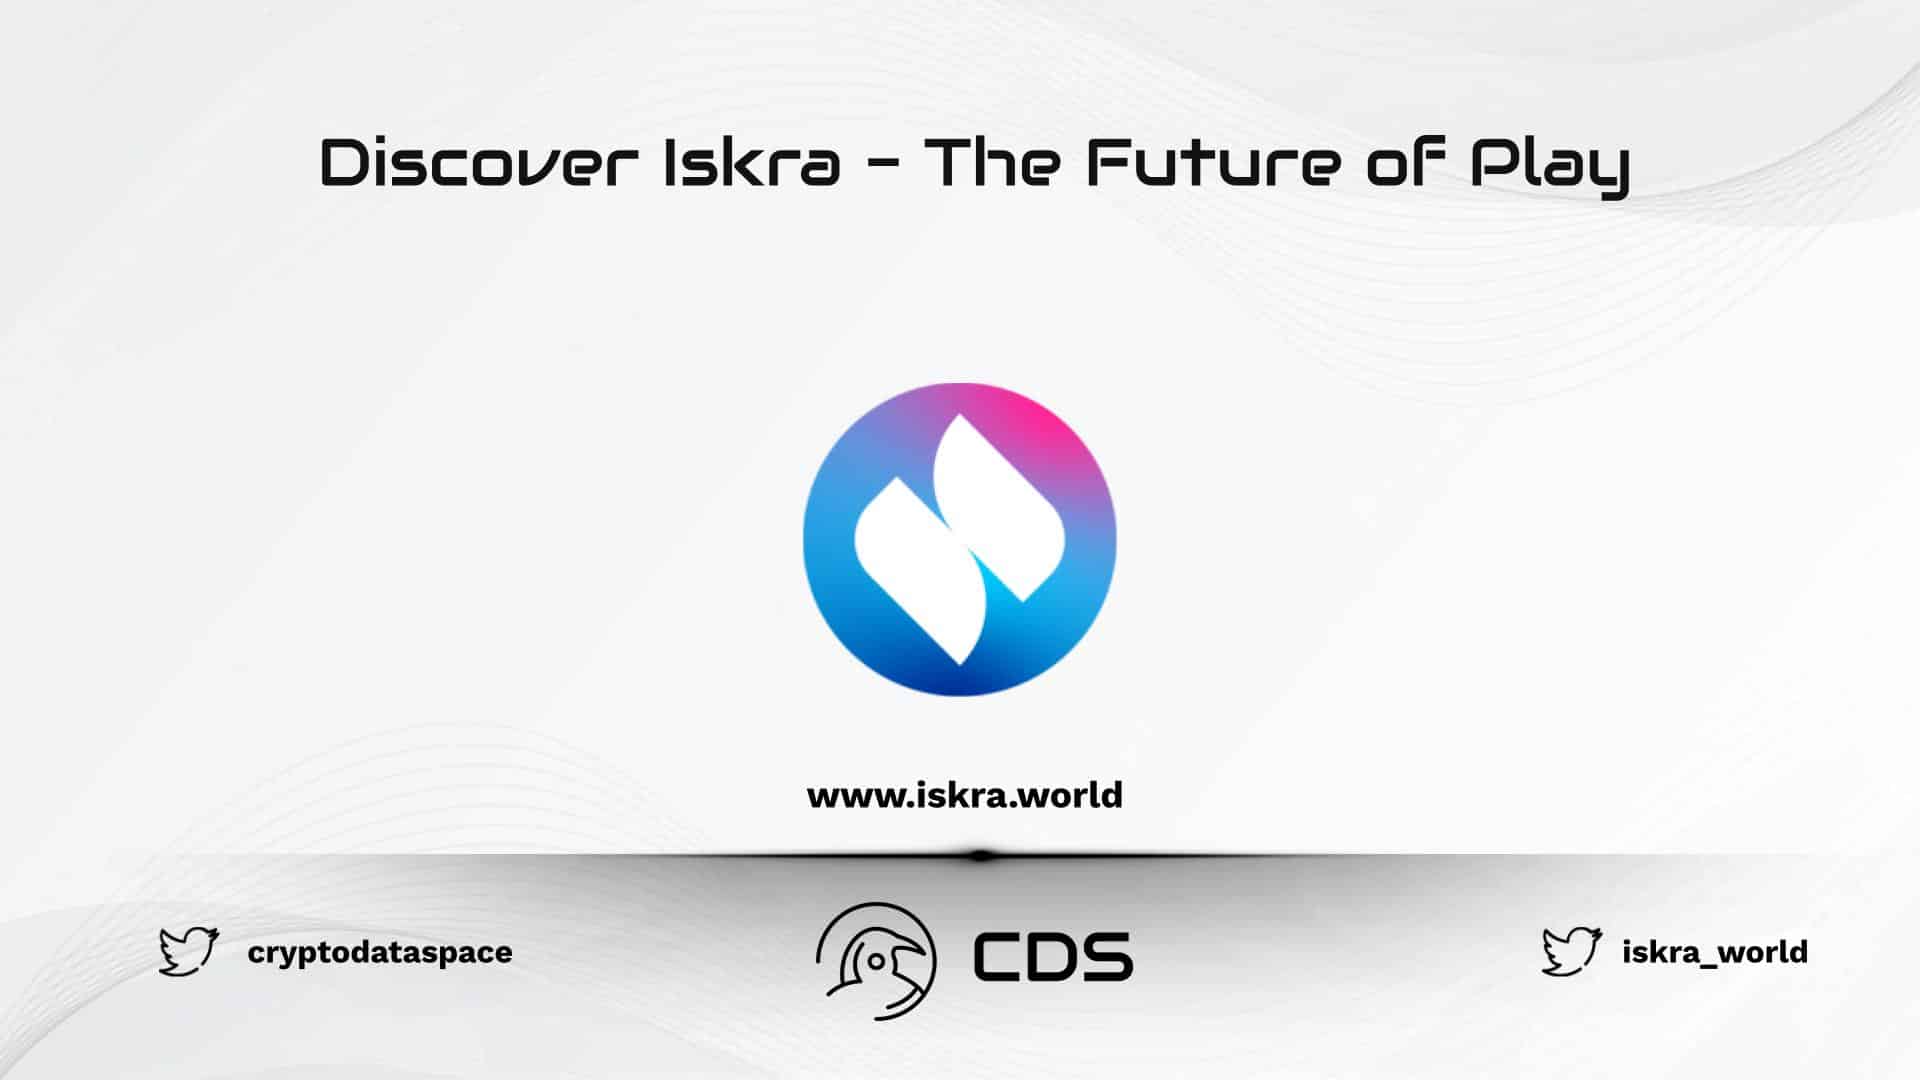 Discover Iskra - The Future of Play